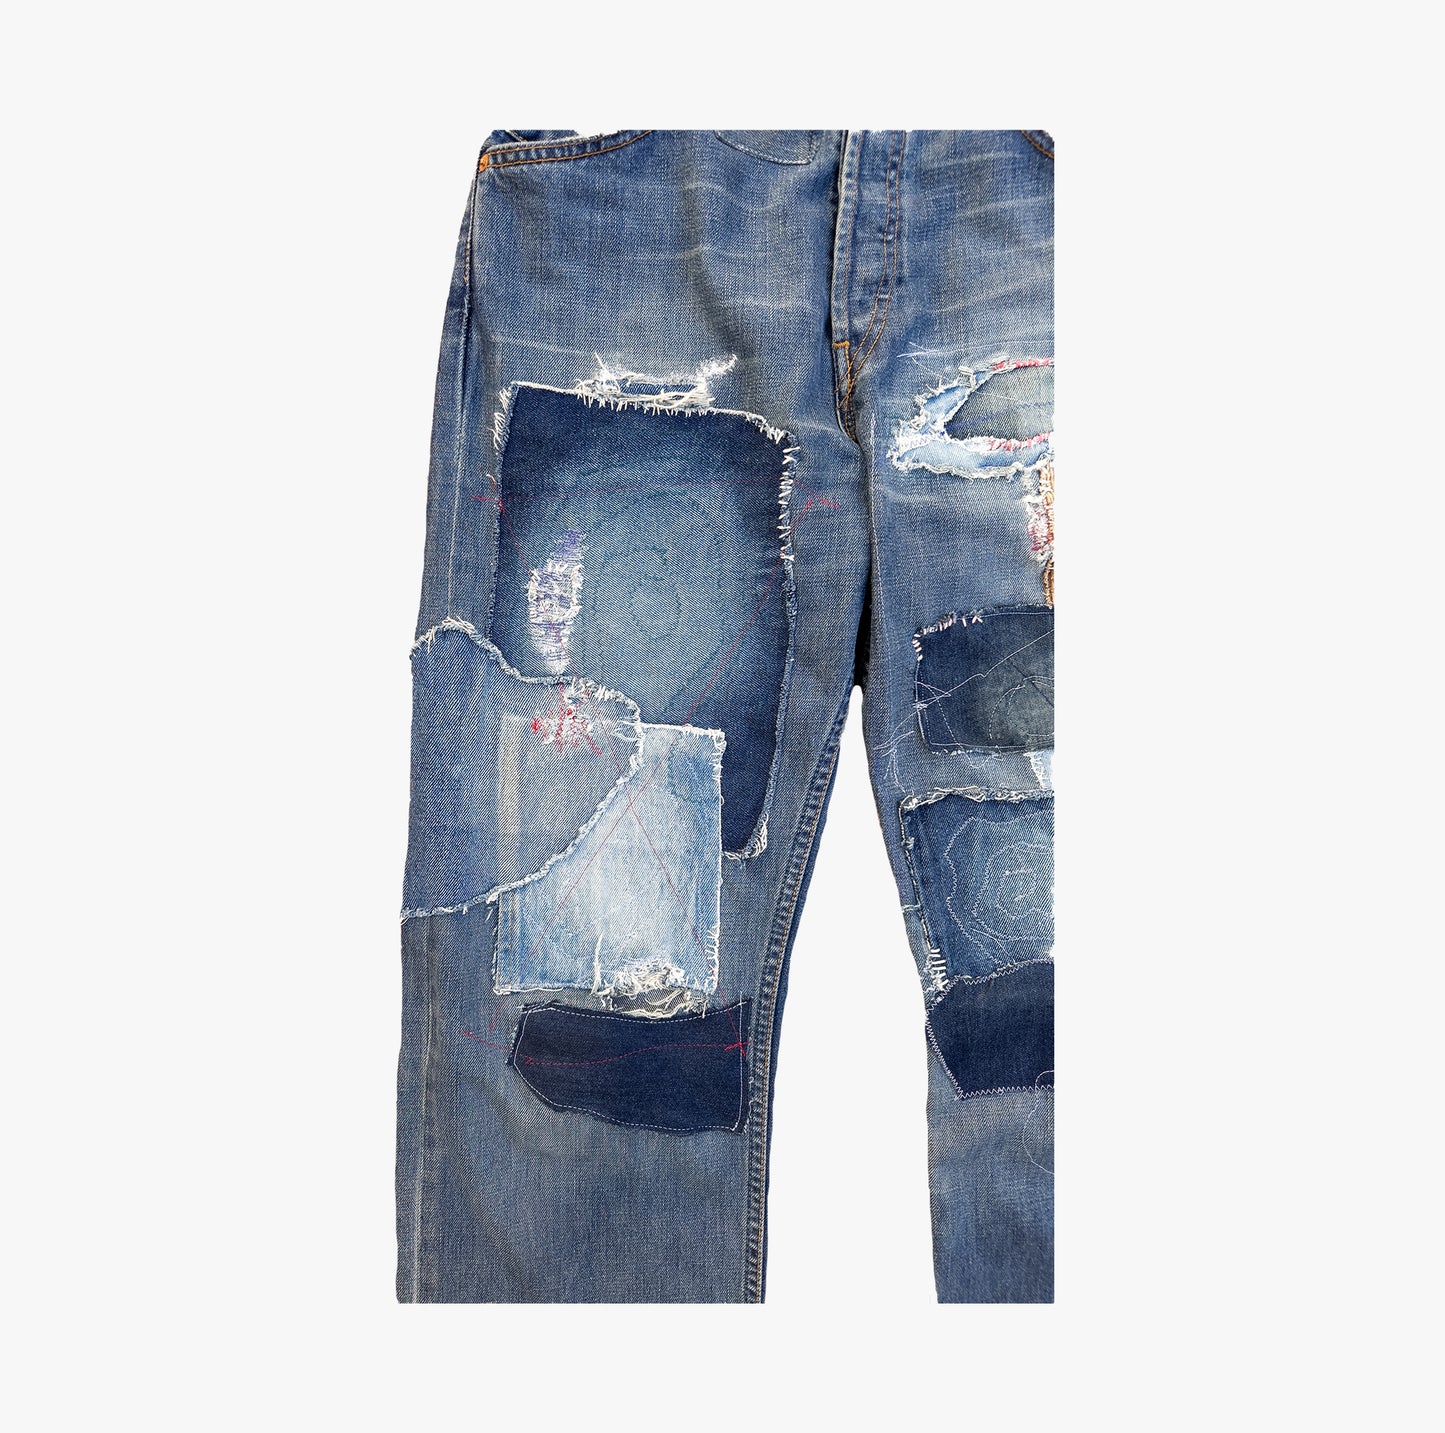 The Strap Patchwork Jeans